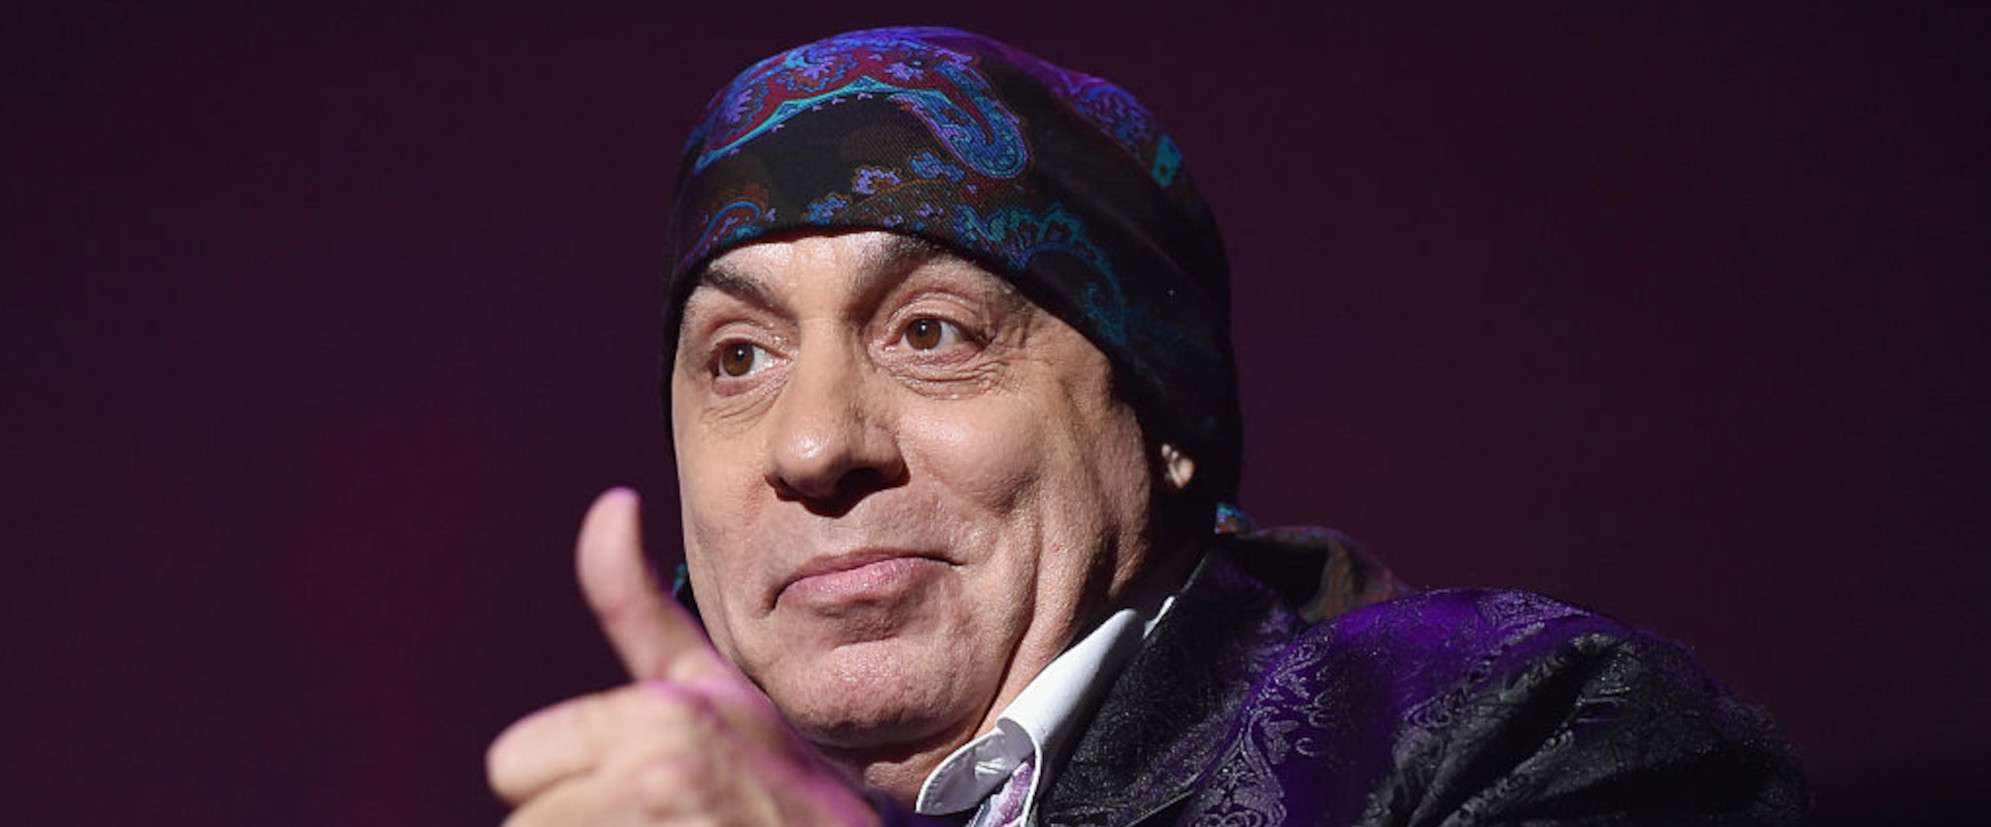 Steven Van Zandt and Bruce Springsteen Set to Chat About New Book Release